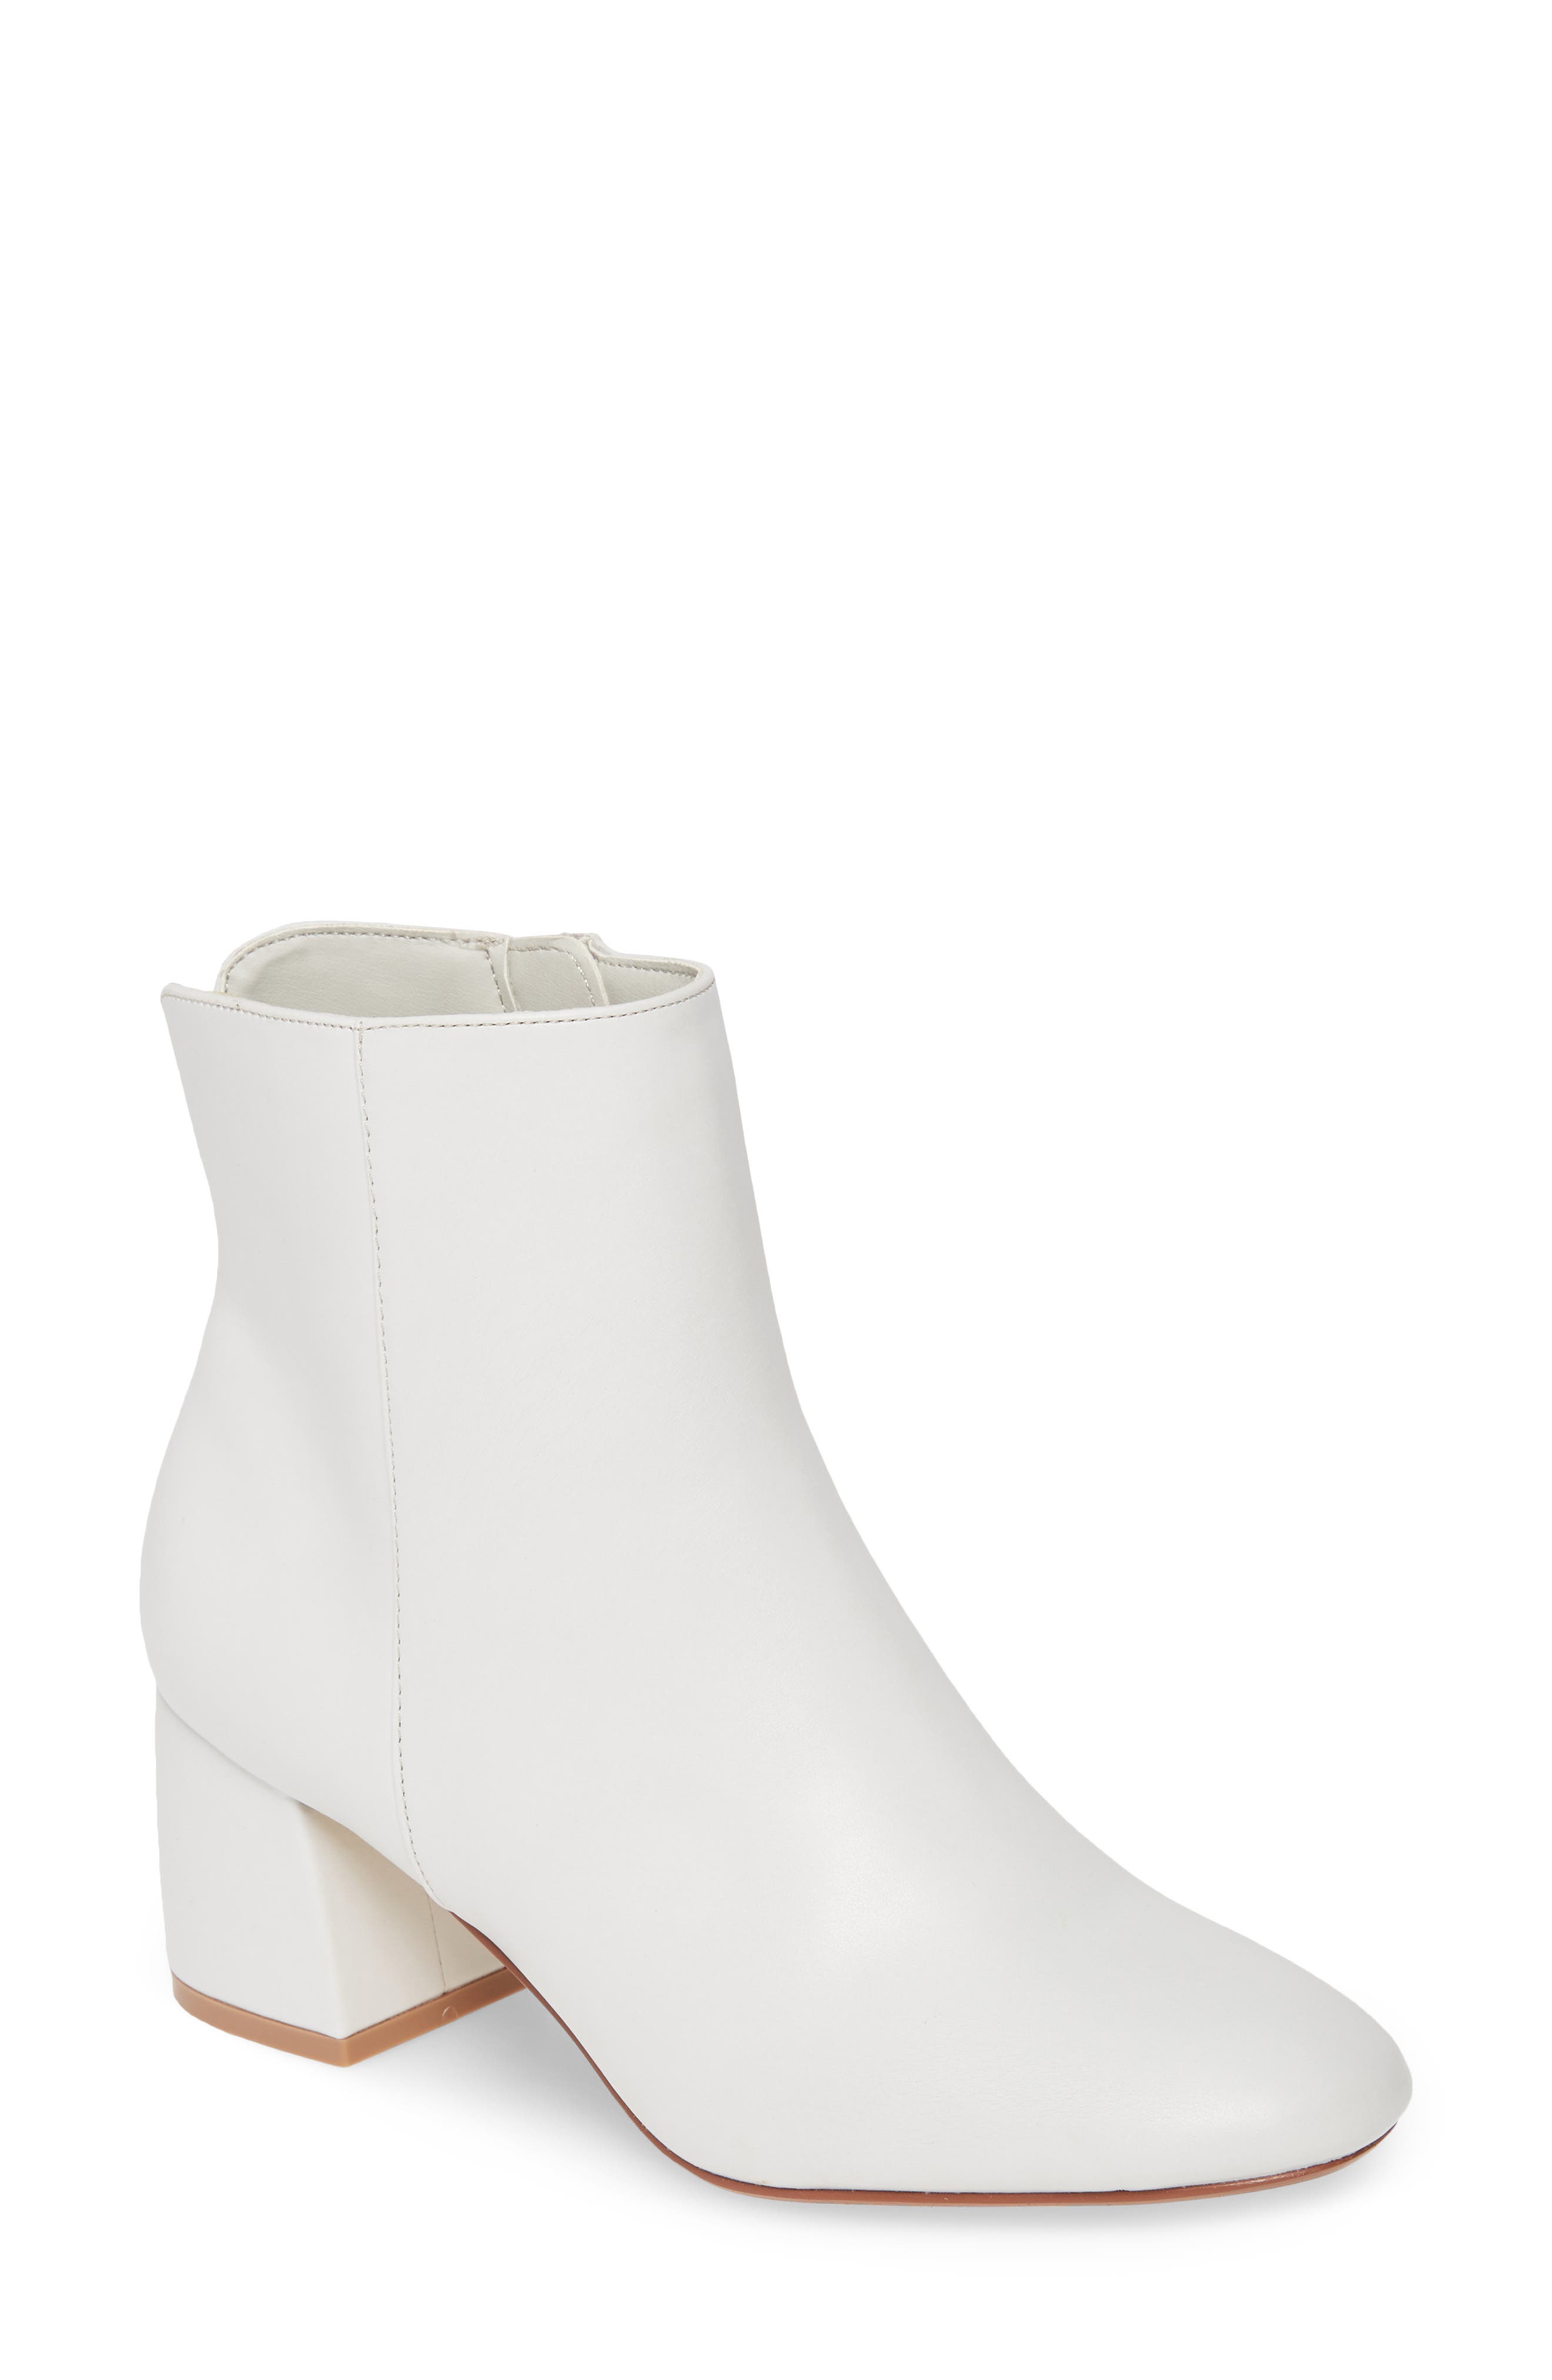 Women's Chinese Laundry Shoes | Nordstrom